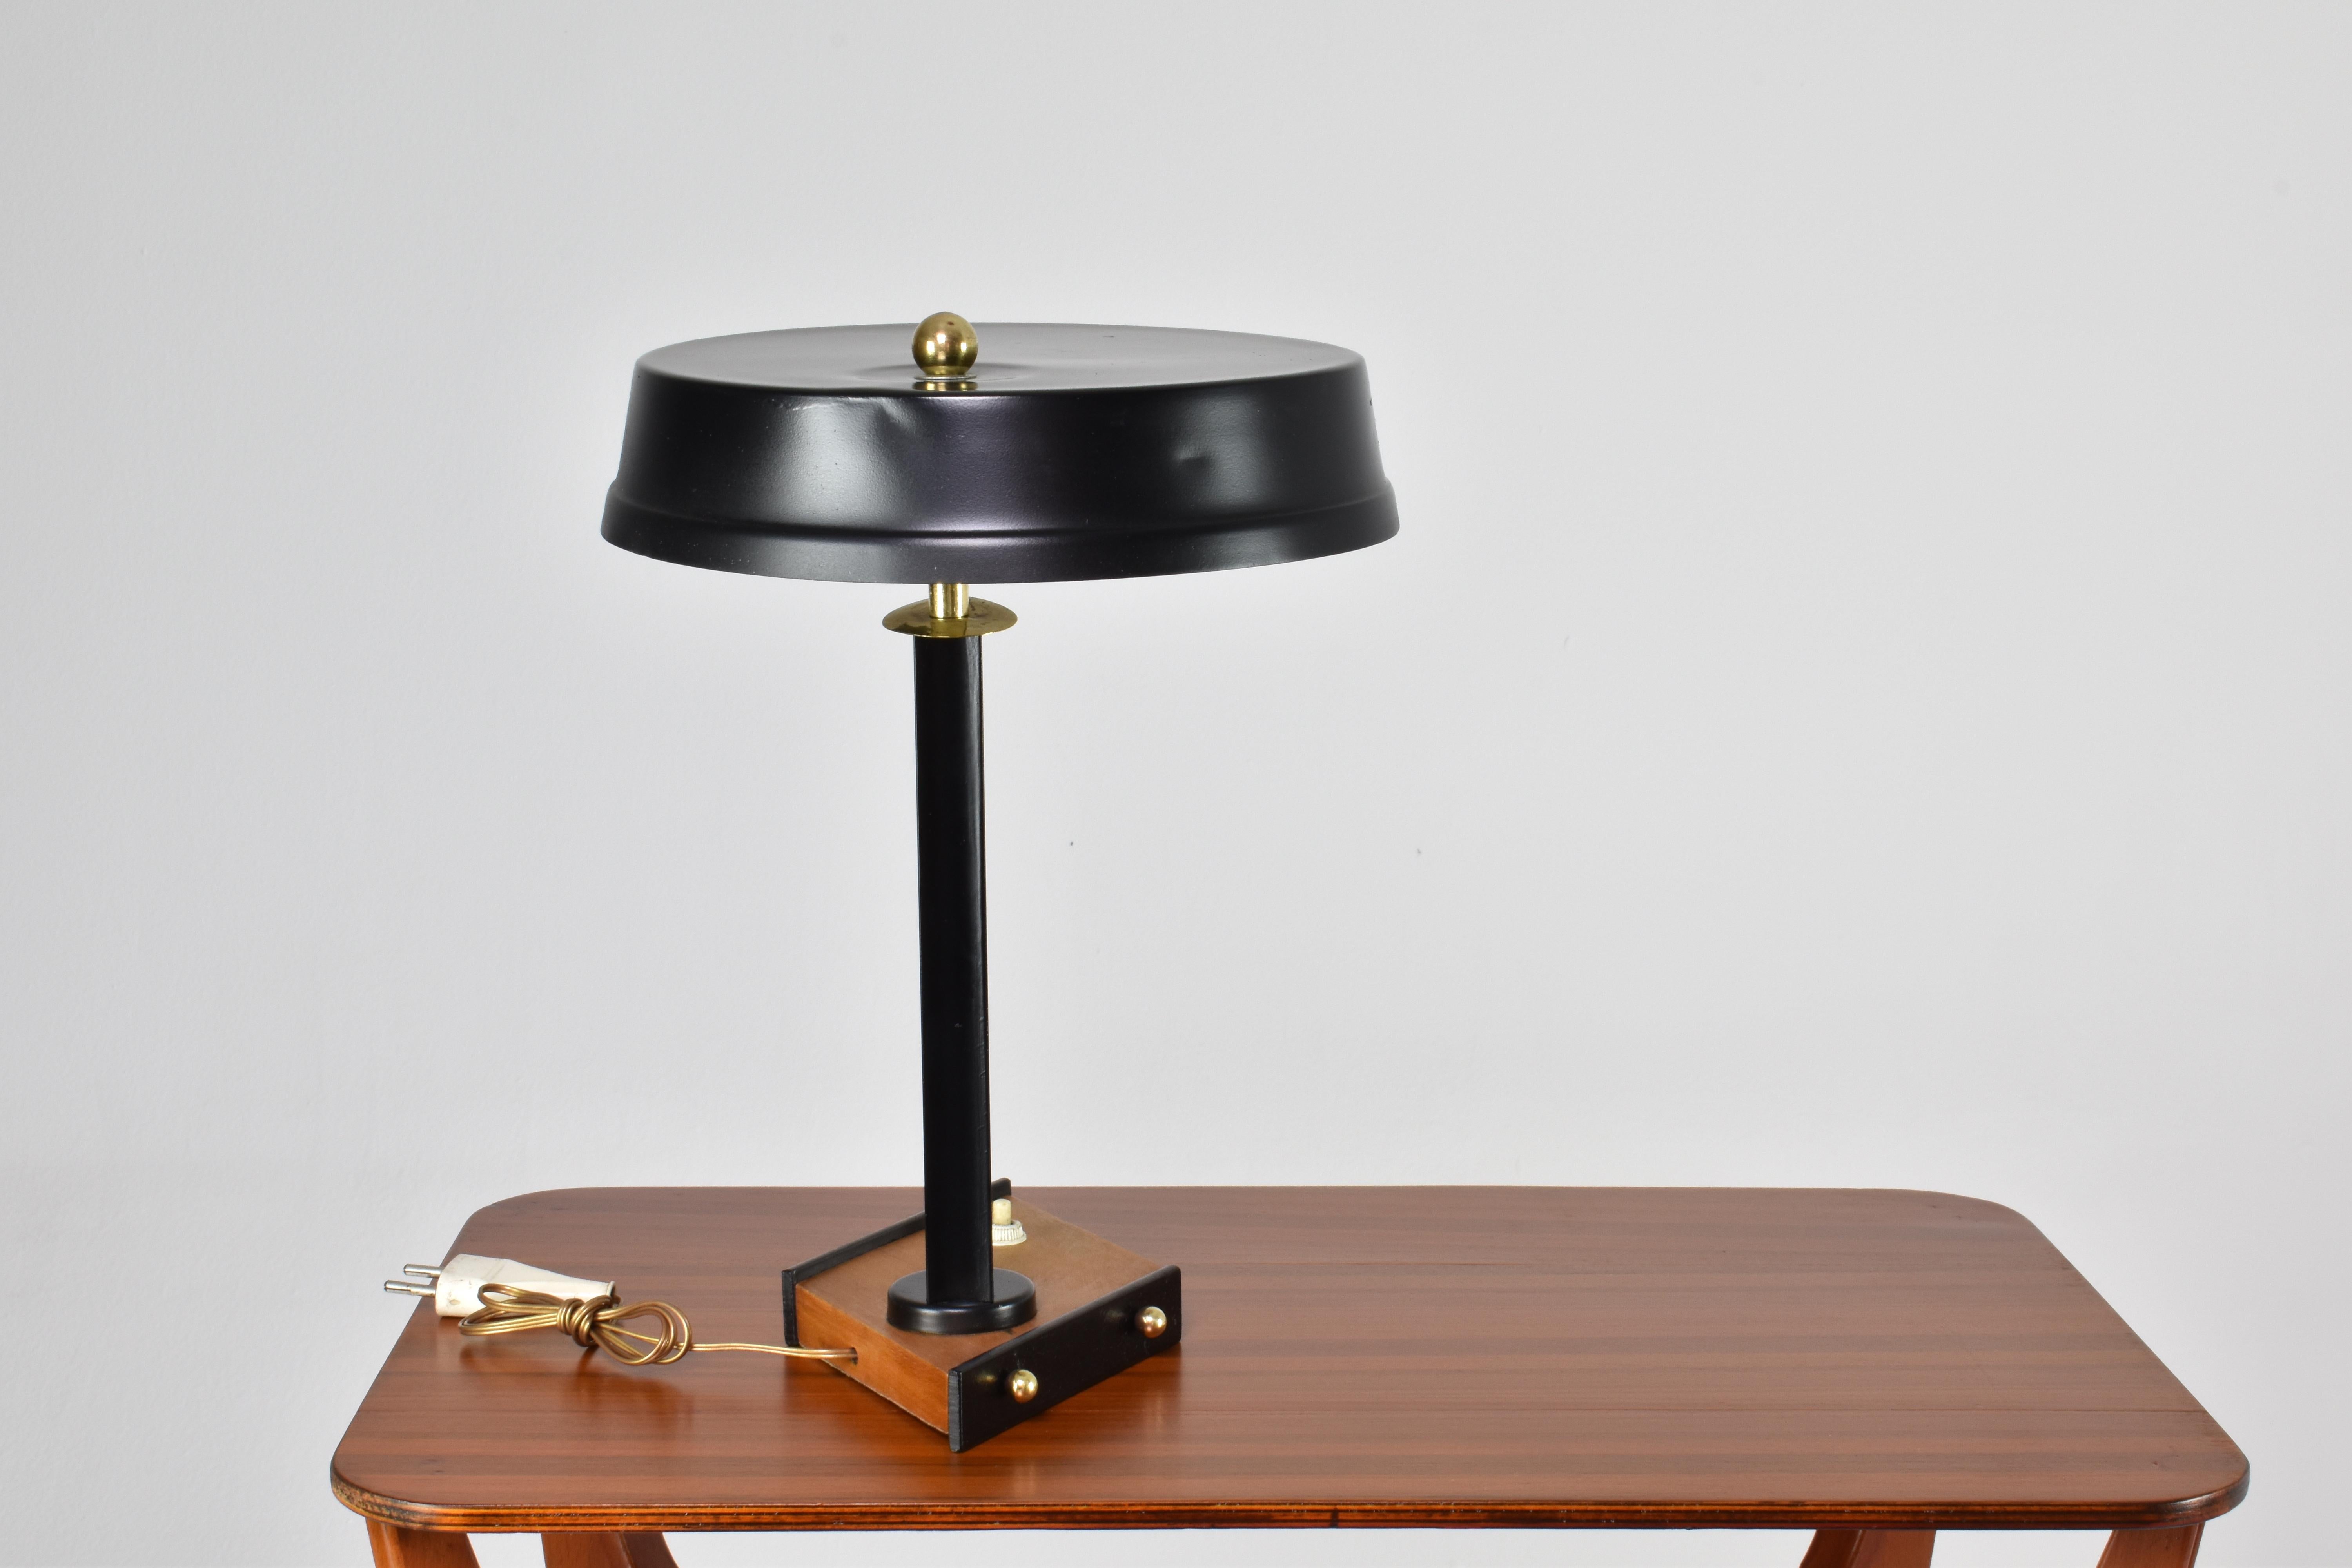 This Italian vintage desk lamp is a statement in design. This piece is meticulously restored and rewired to international standards. It features an elegant matte black lacquer finish, complemented by a wooden base, creating a contrasting aesthetic.